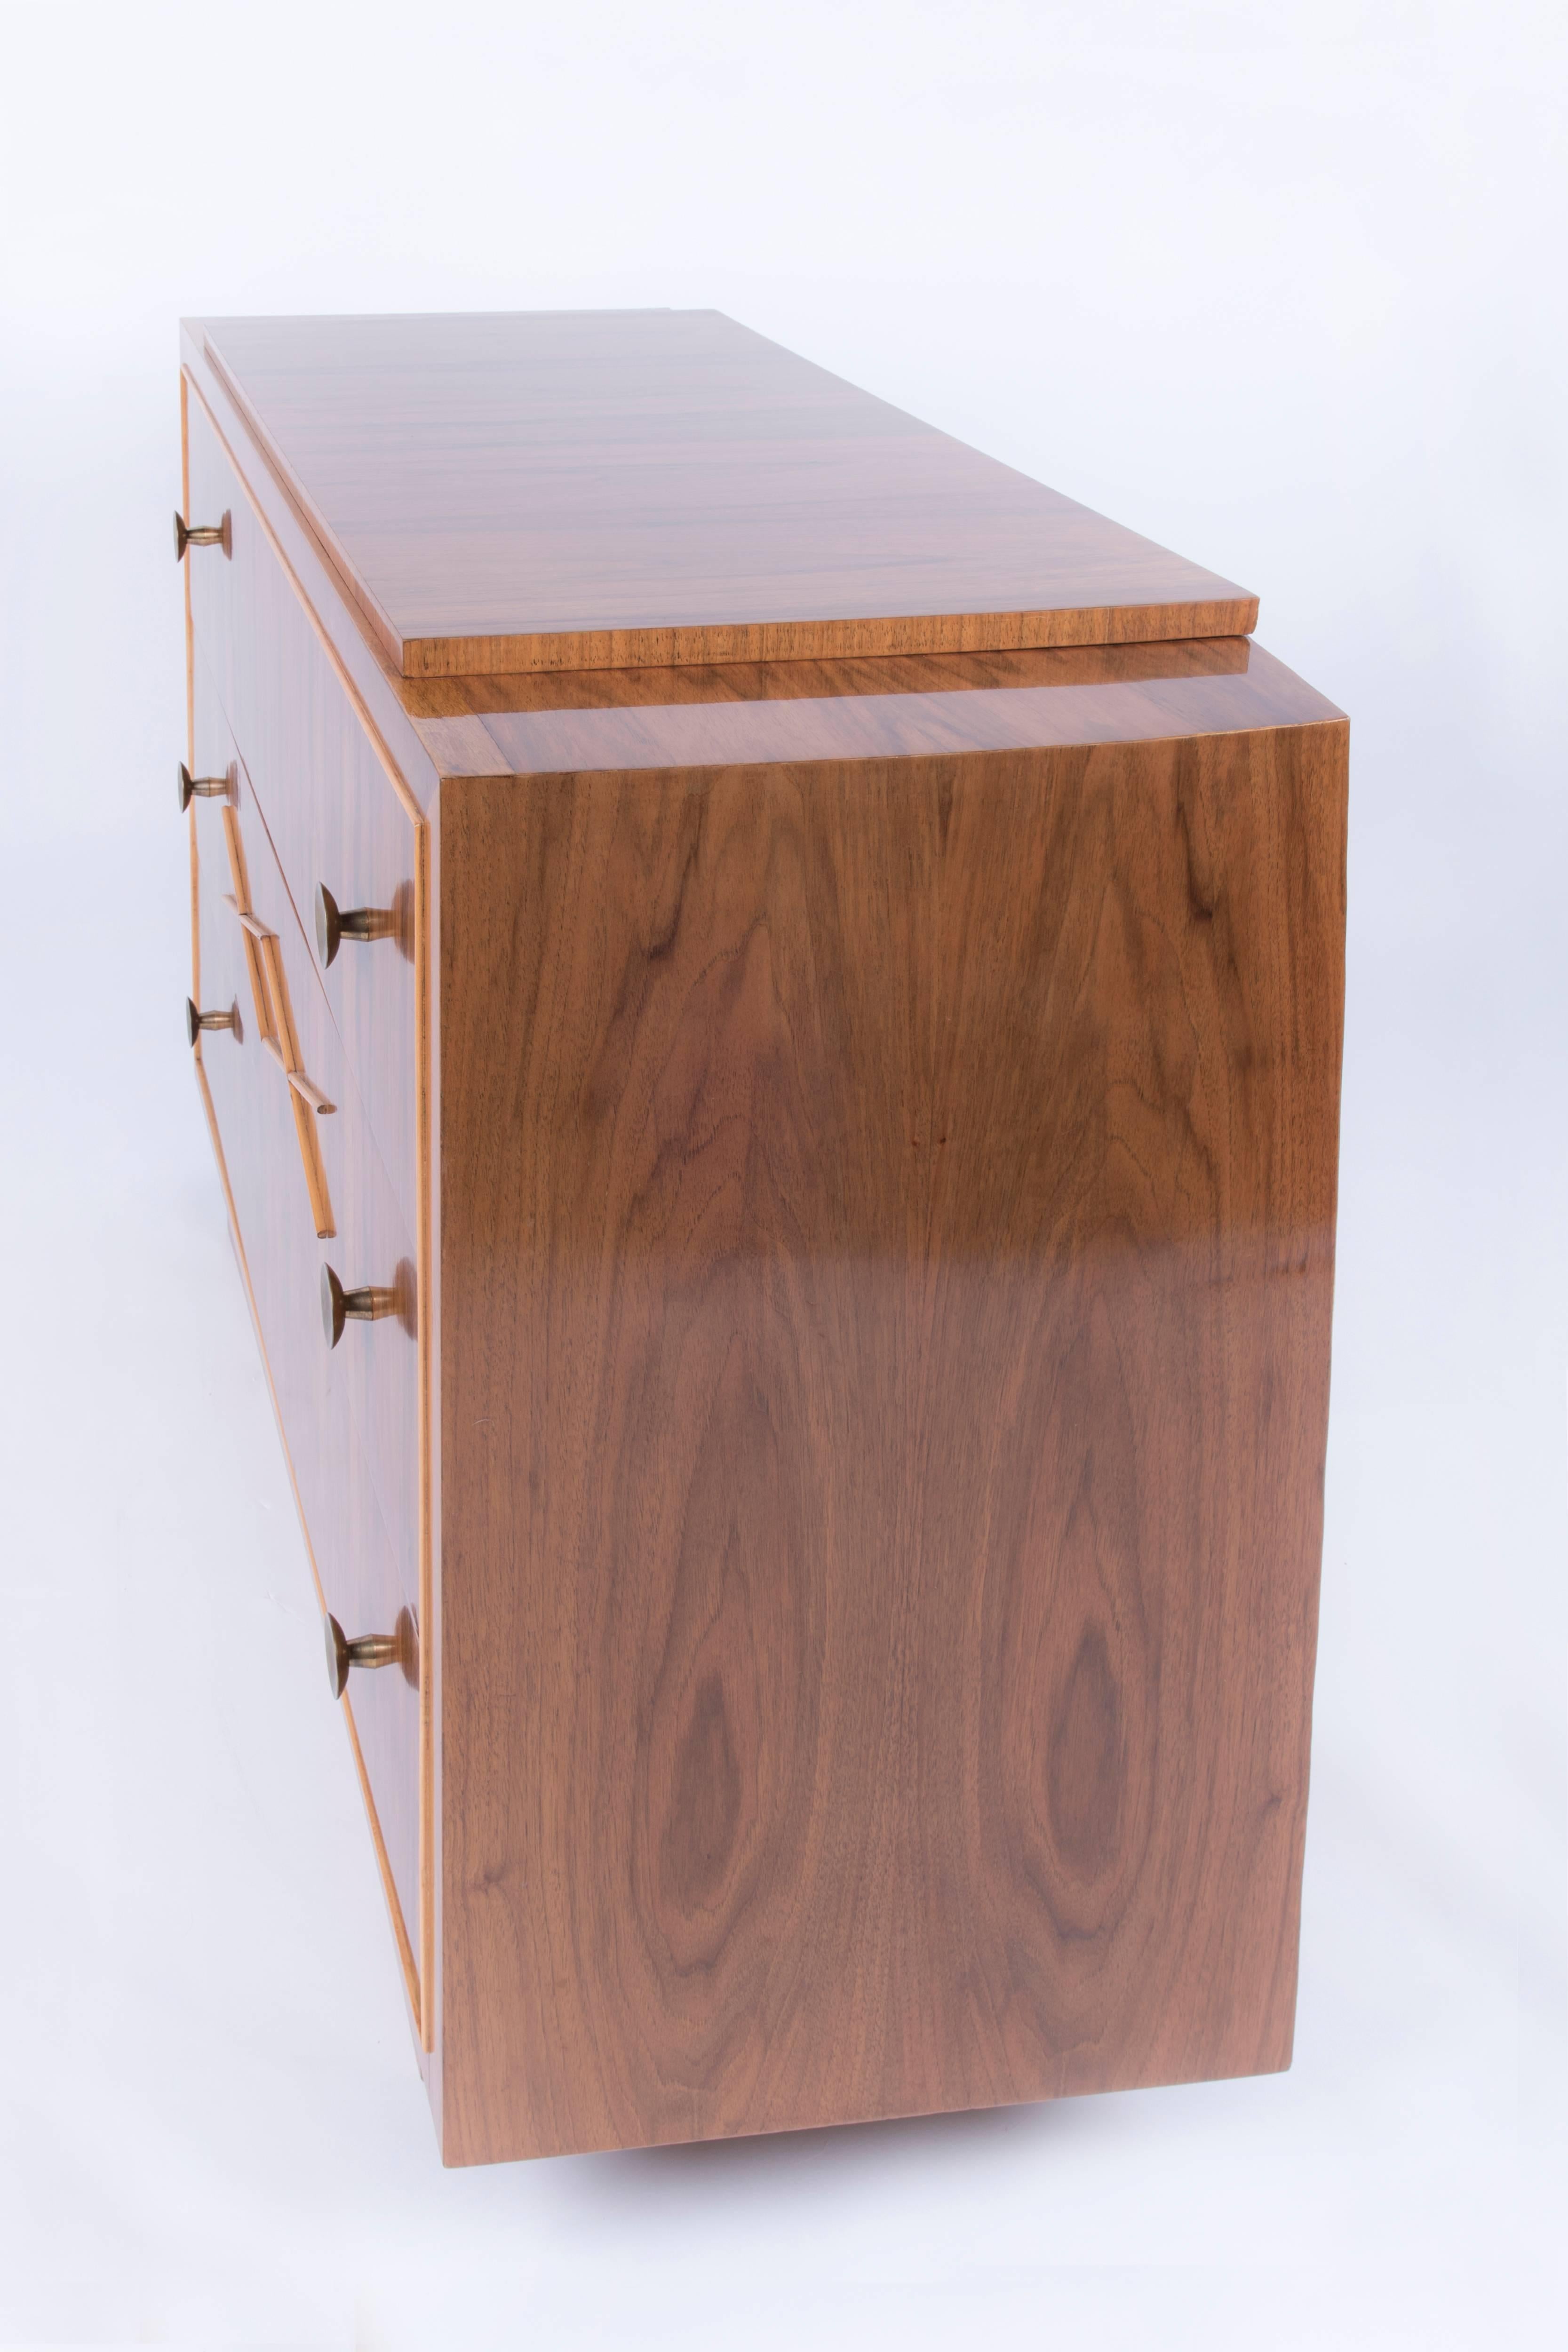 Polished Art Deco Chest of Drawers by De Coene